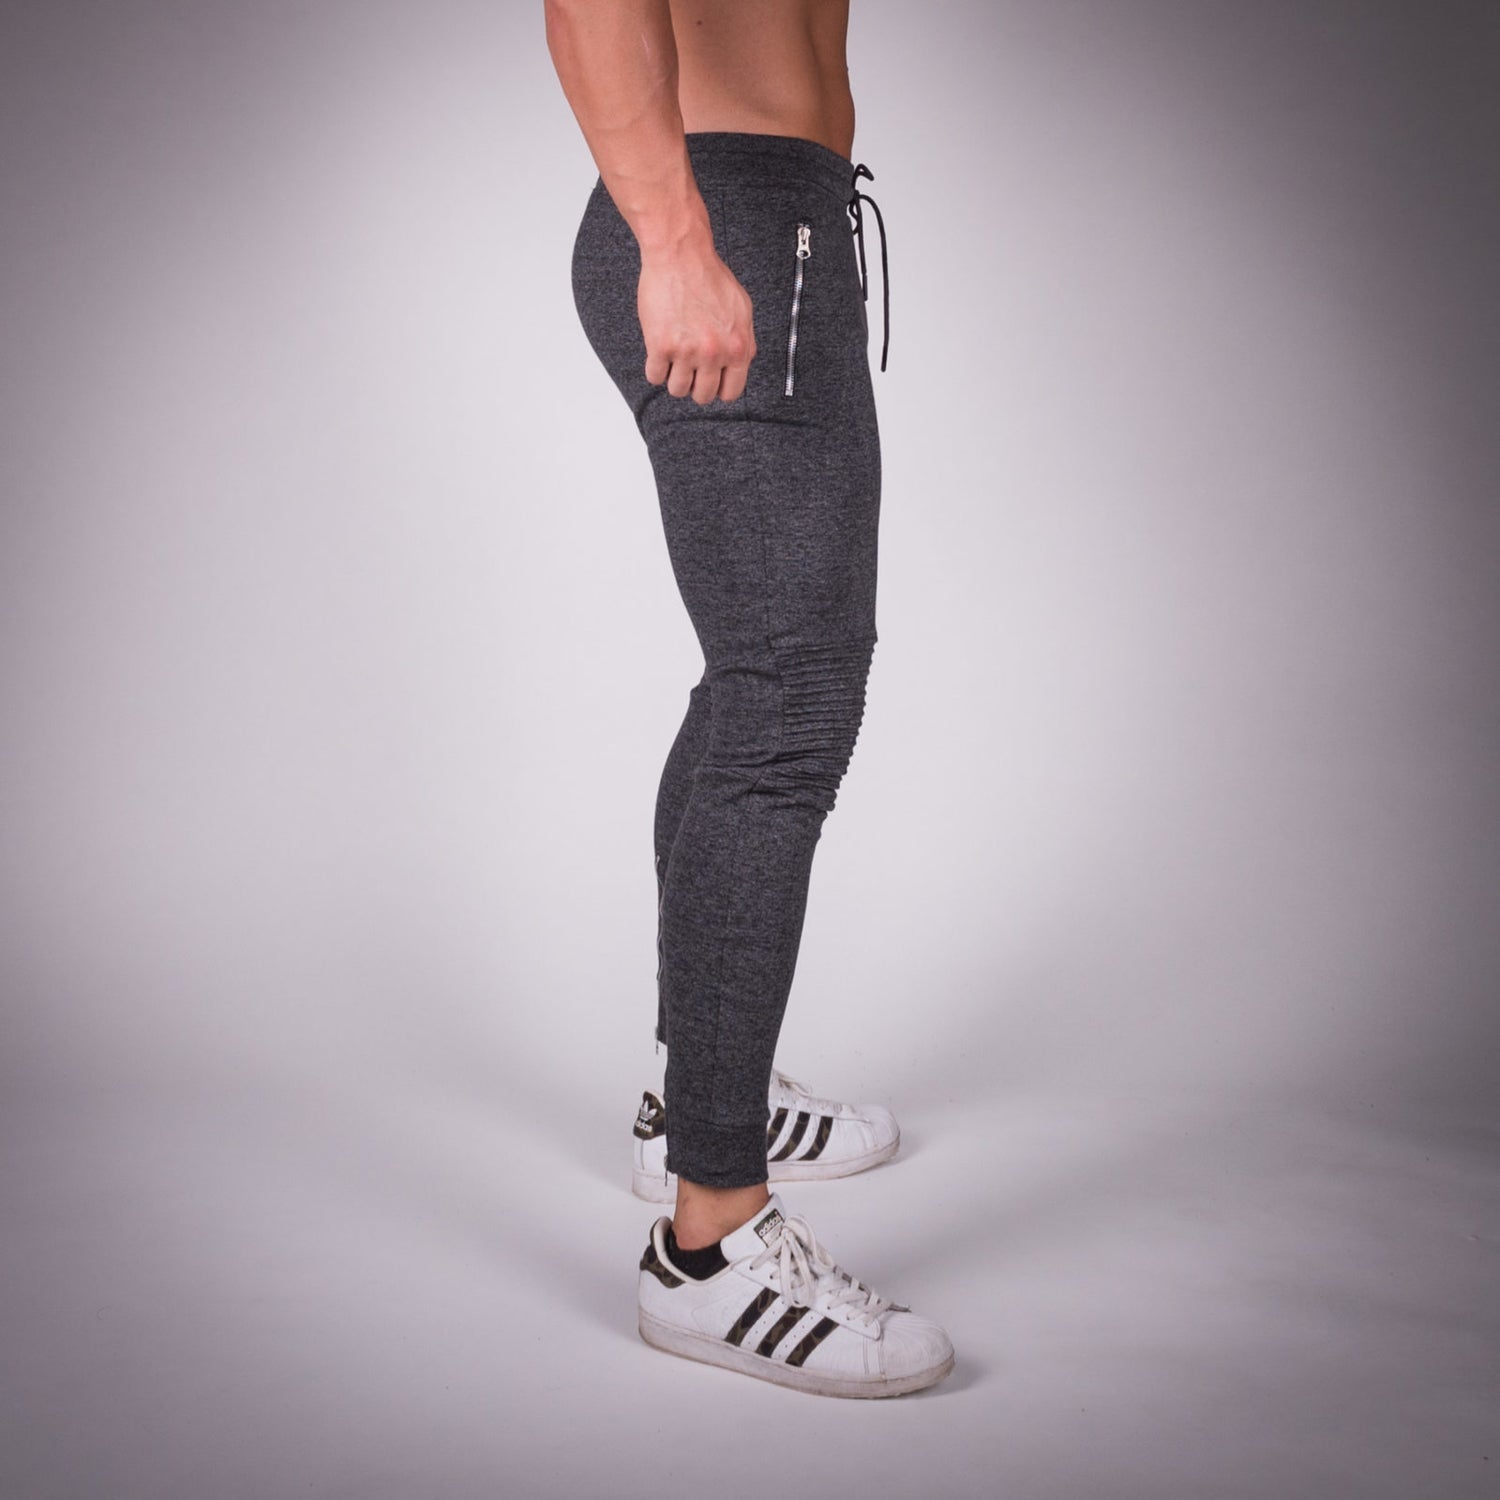 squatwolf-gym-wear-ripped-jogger-pants-grey-workout-pants-for-men